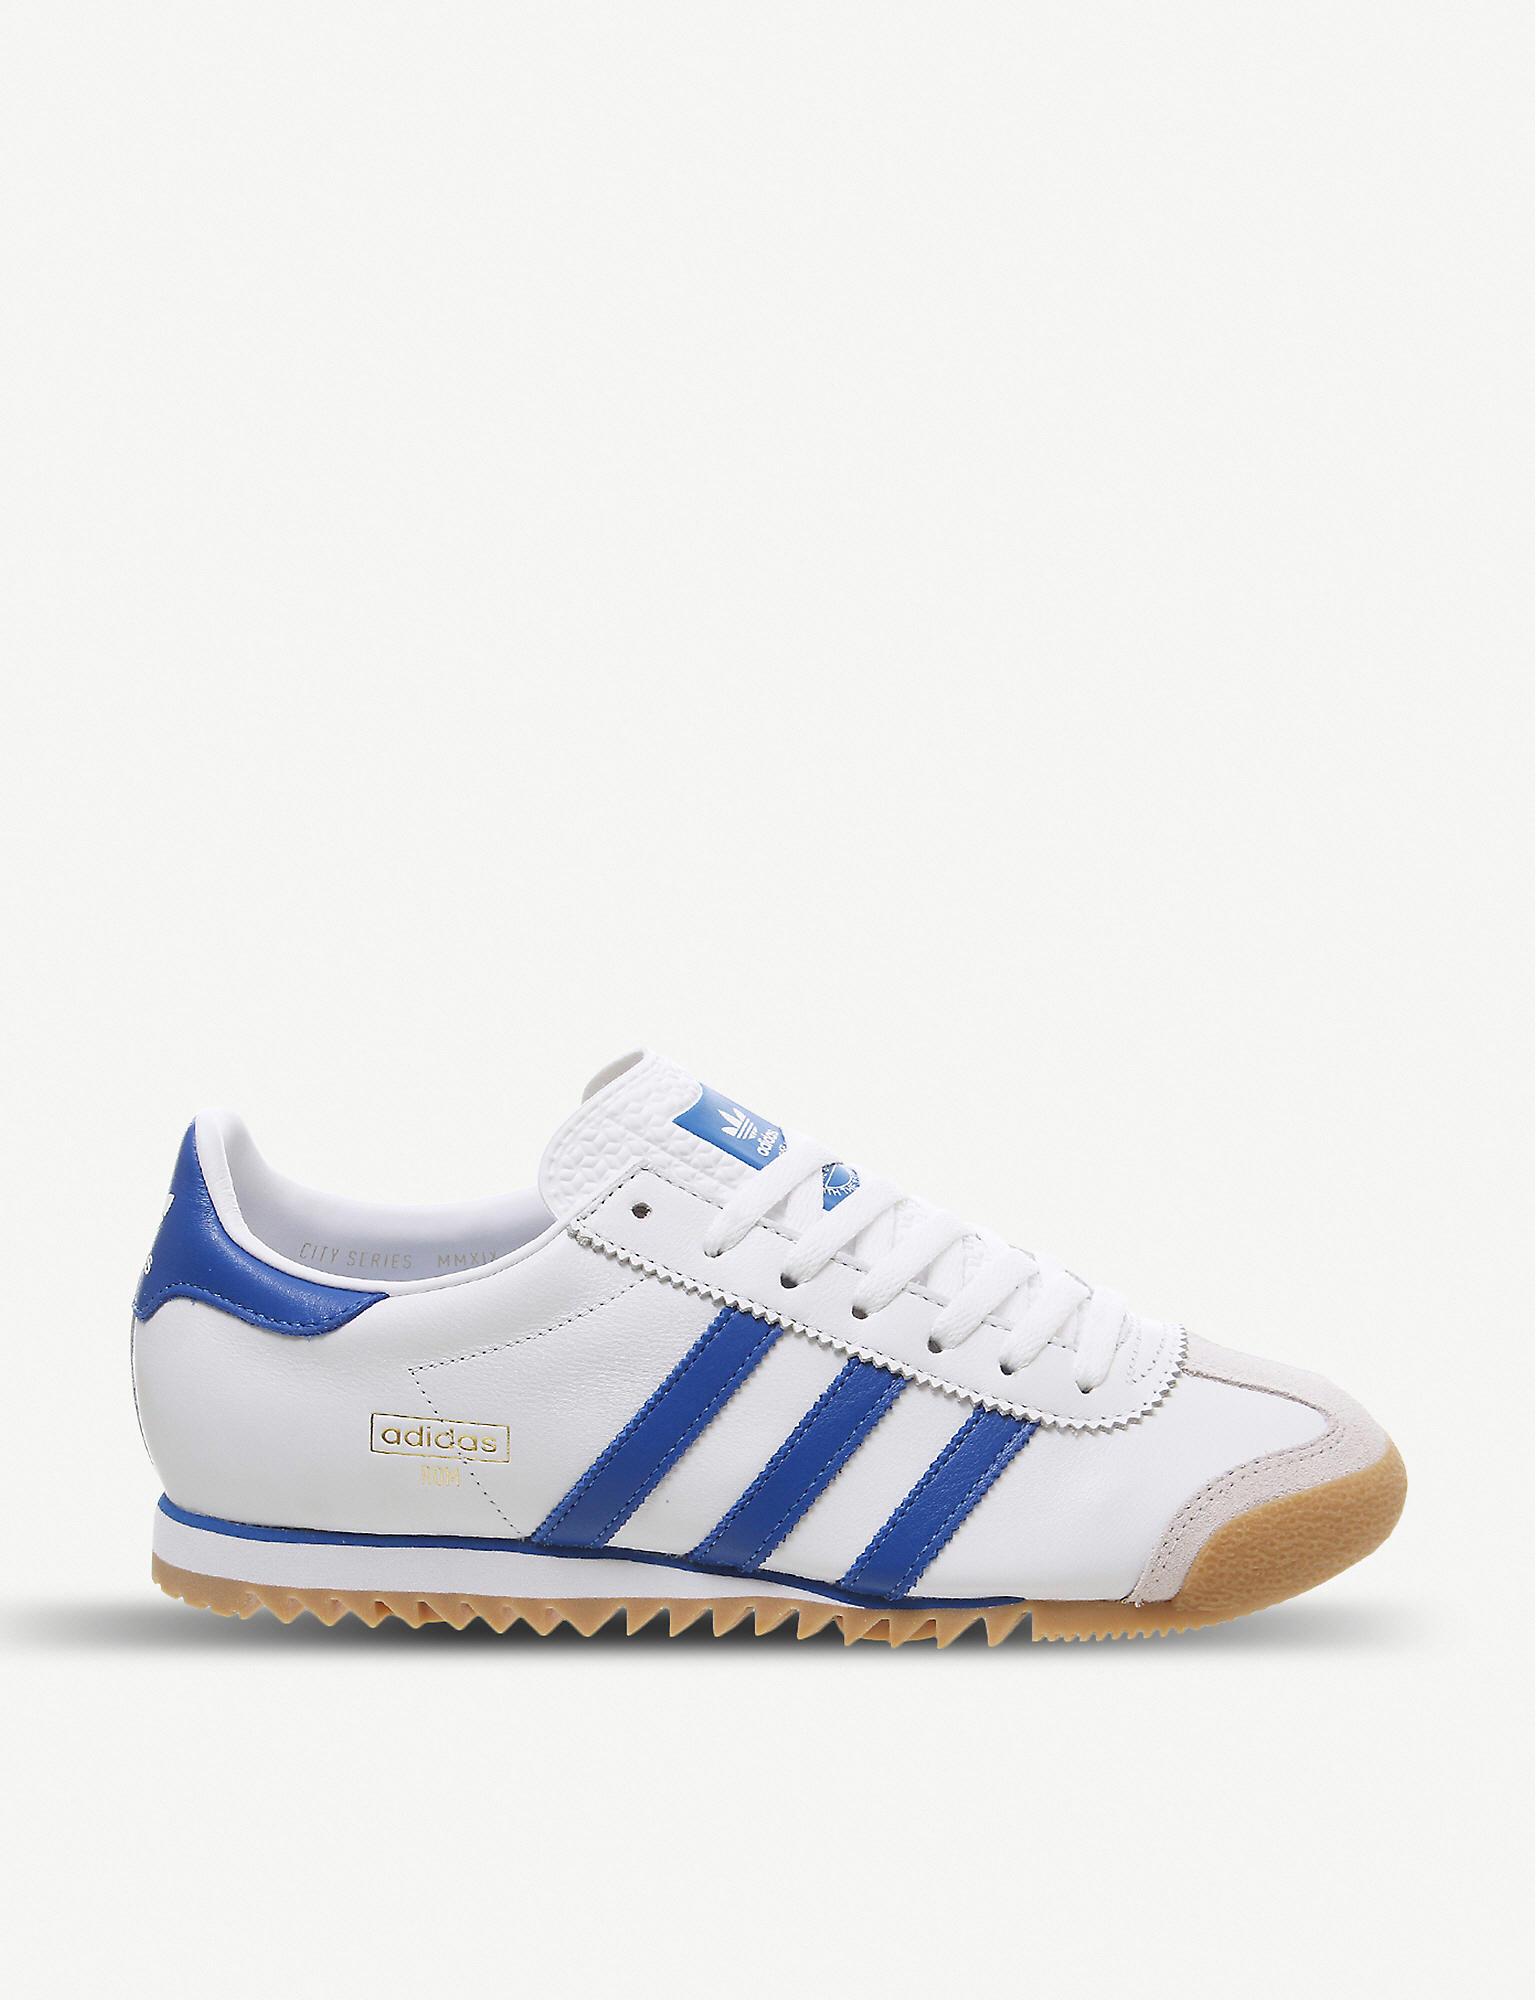 Update 196+ adidas white leather sneakers